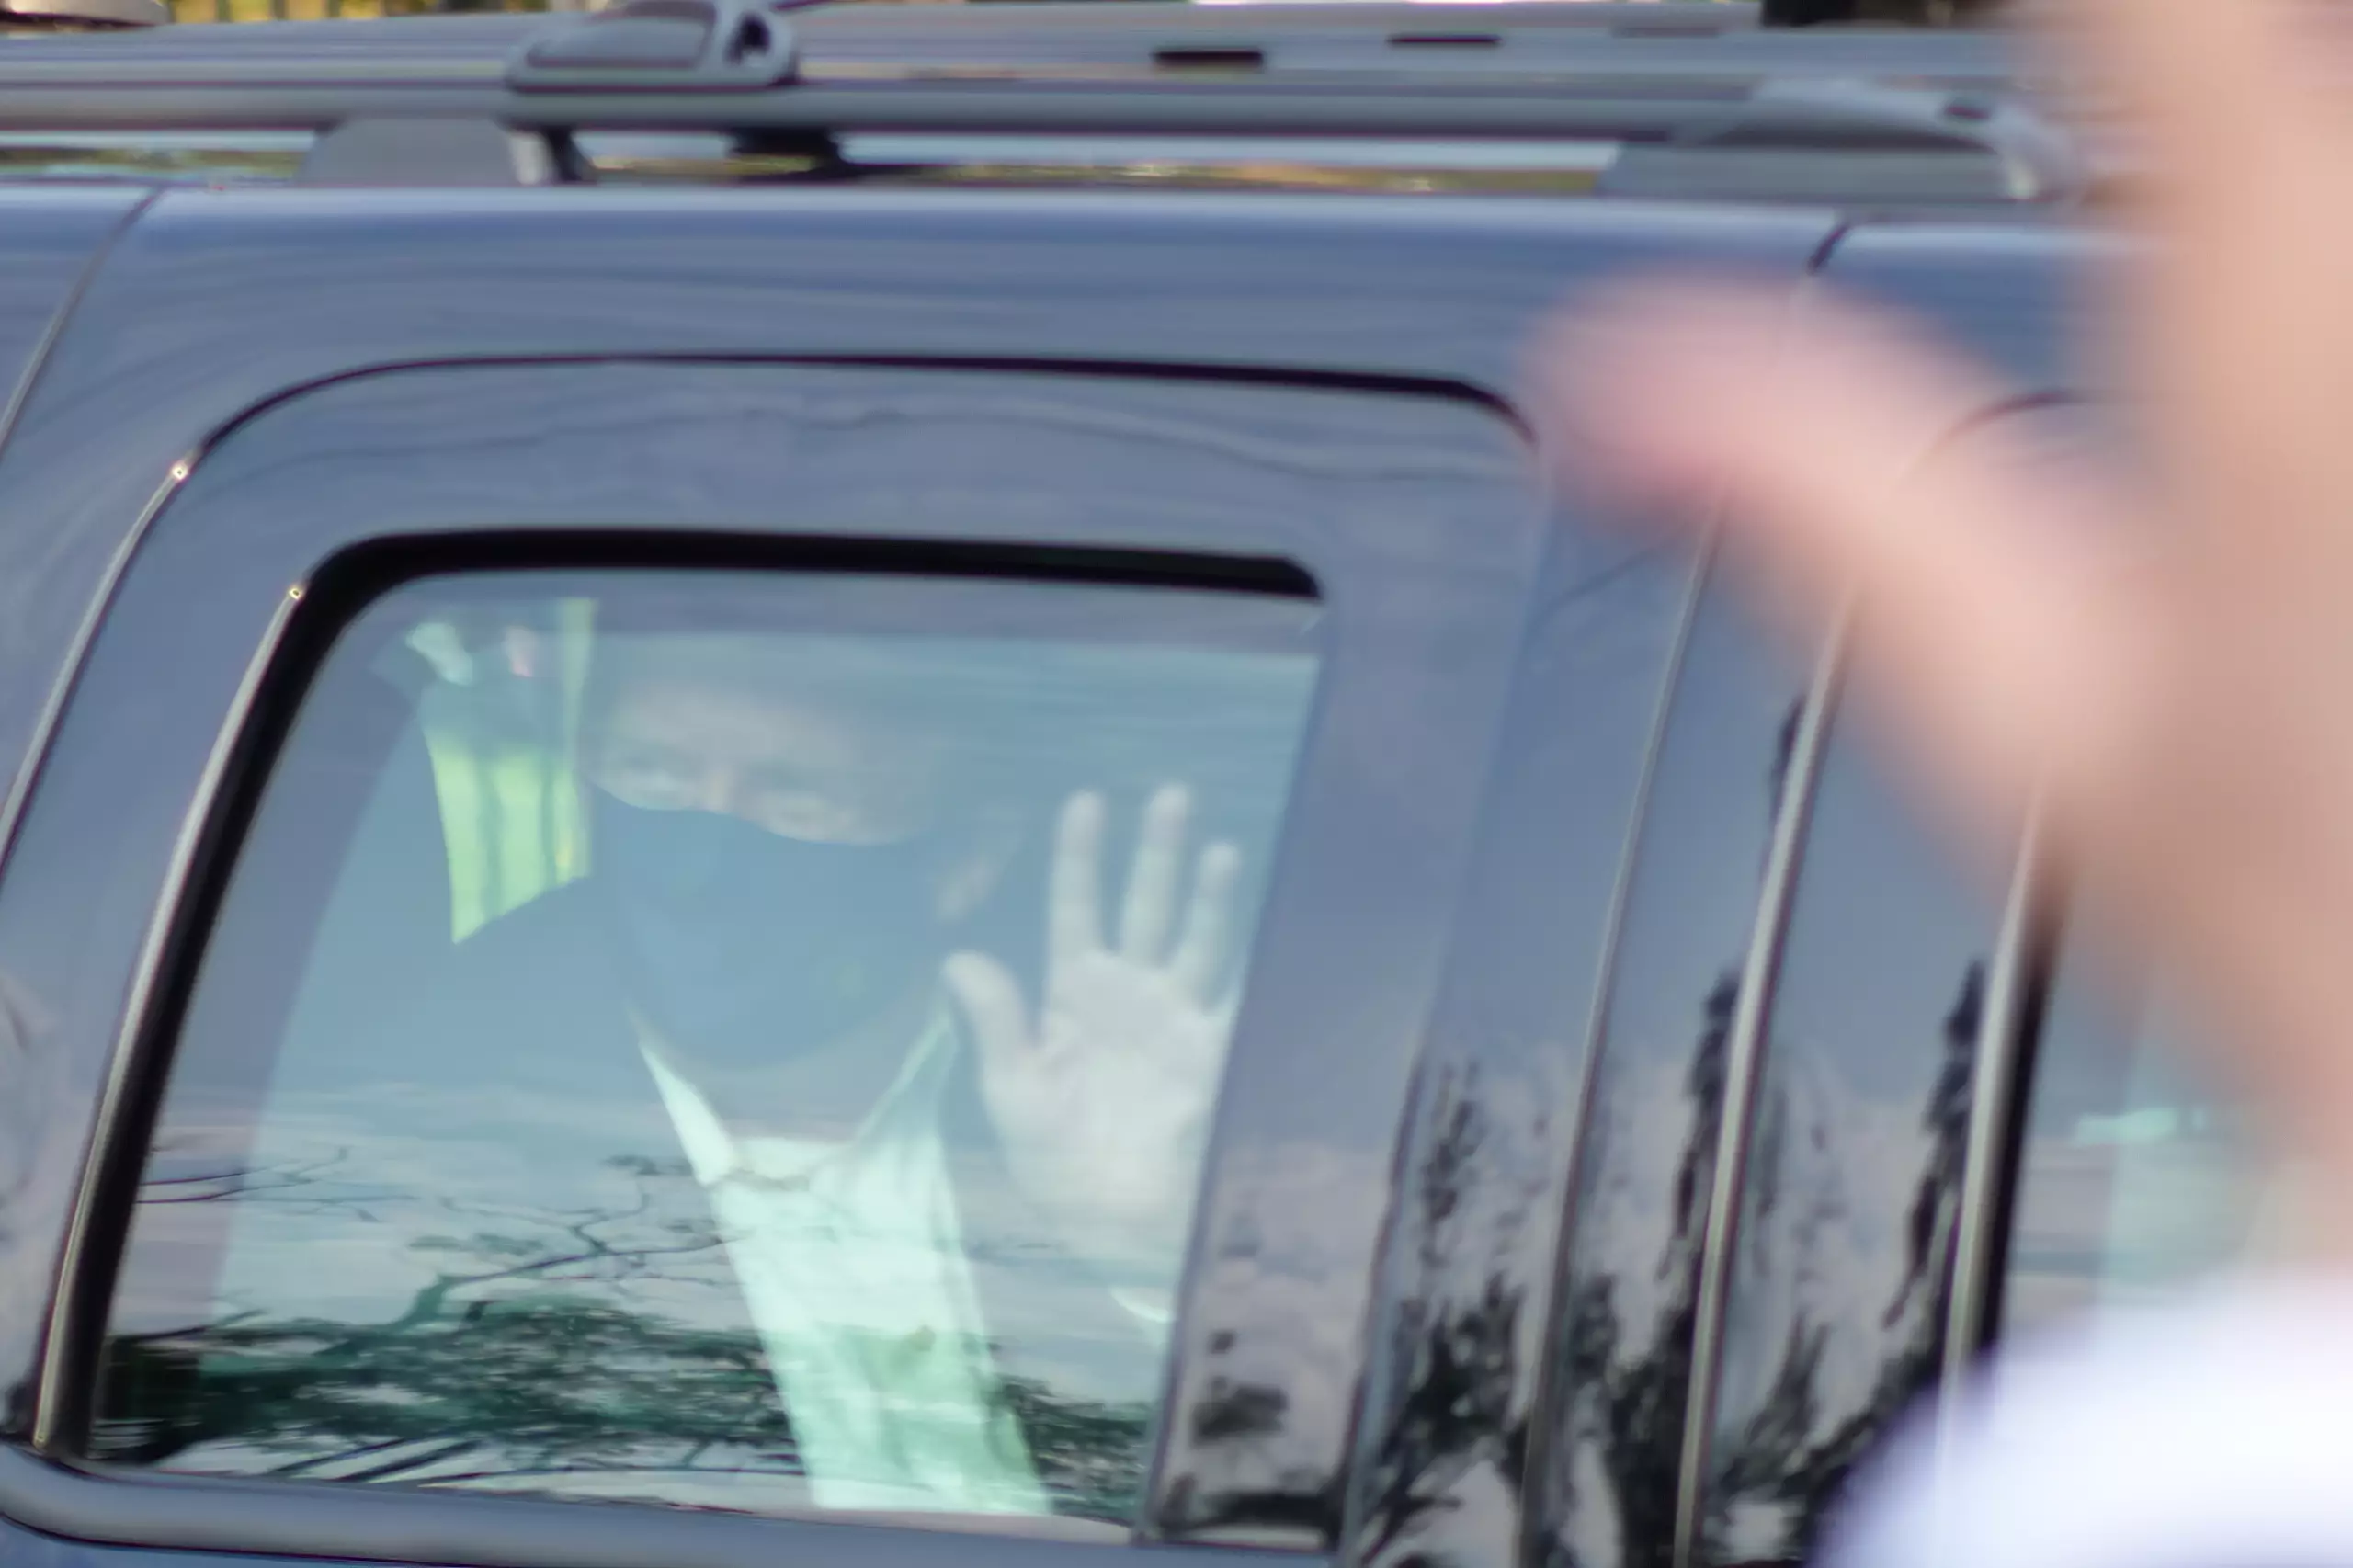 Trump left hospital briefly to wave to fans.